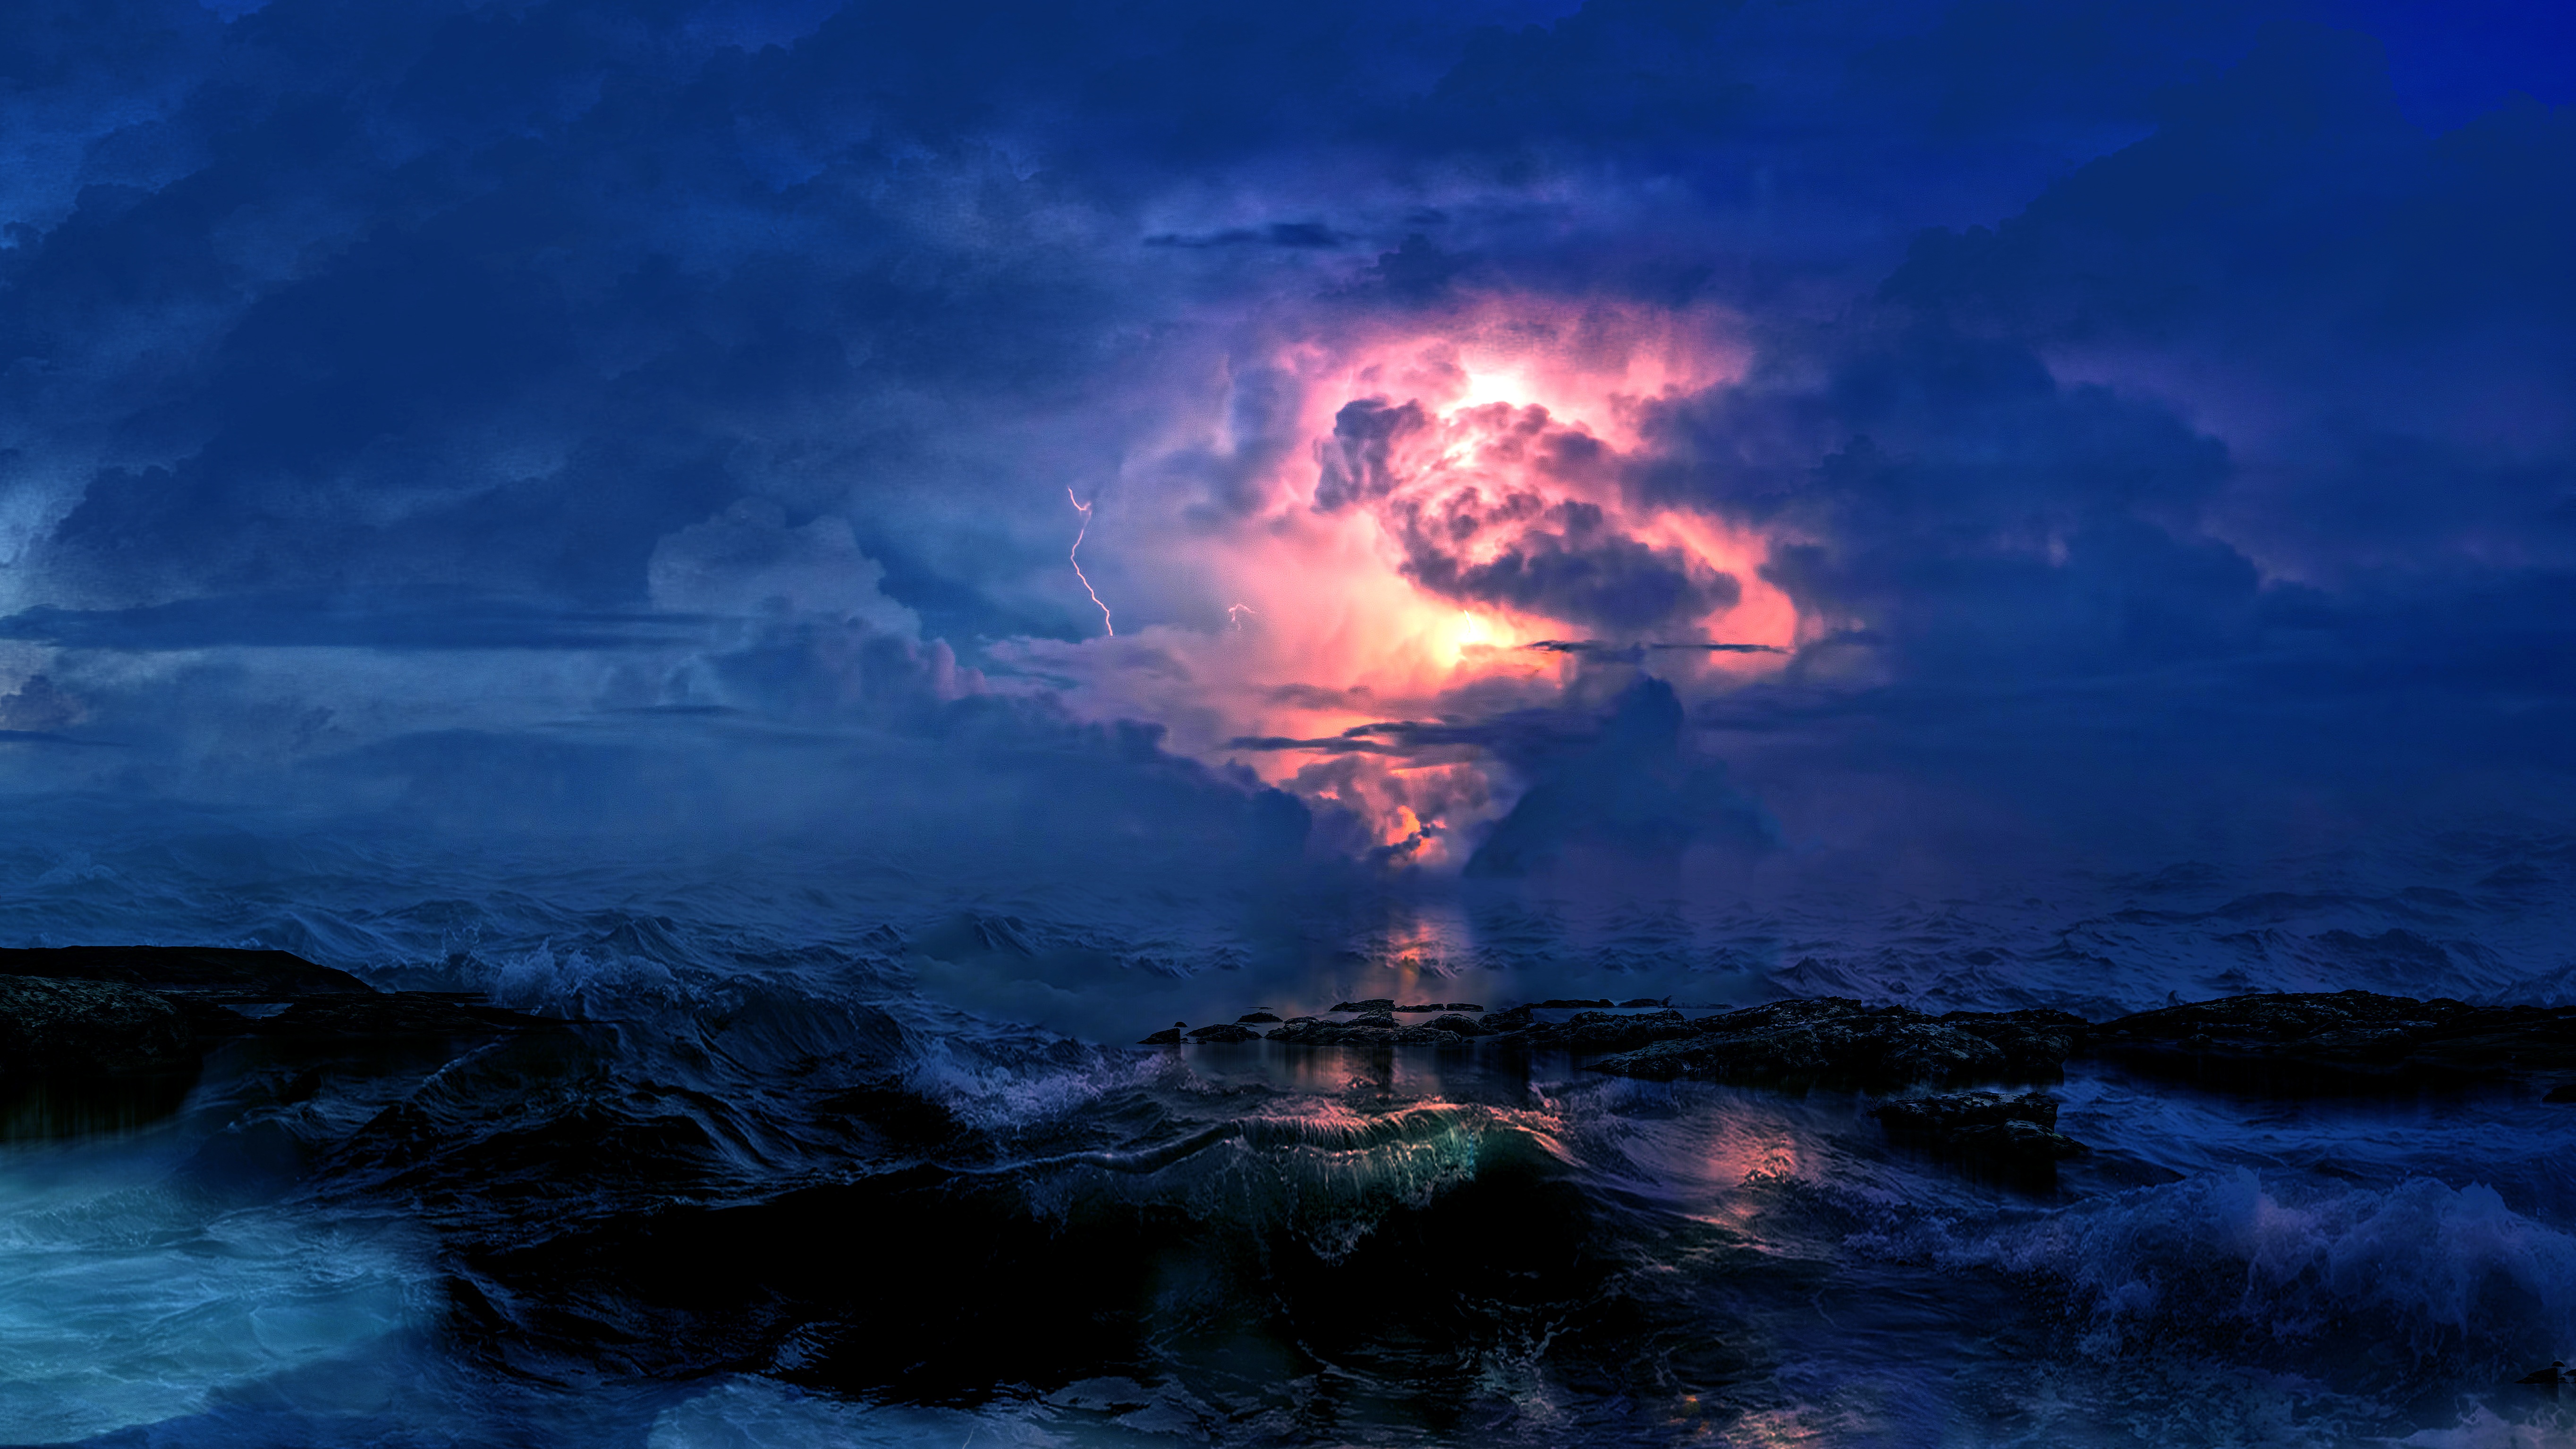 lightning, nature, sea, clouds, waves, mainly cloudy, overcast, storm